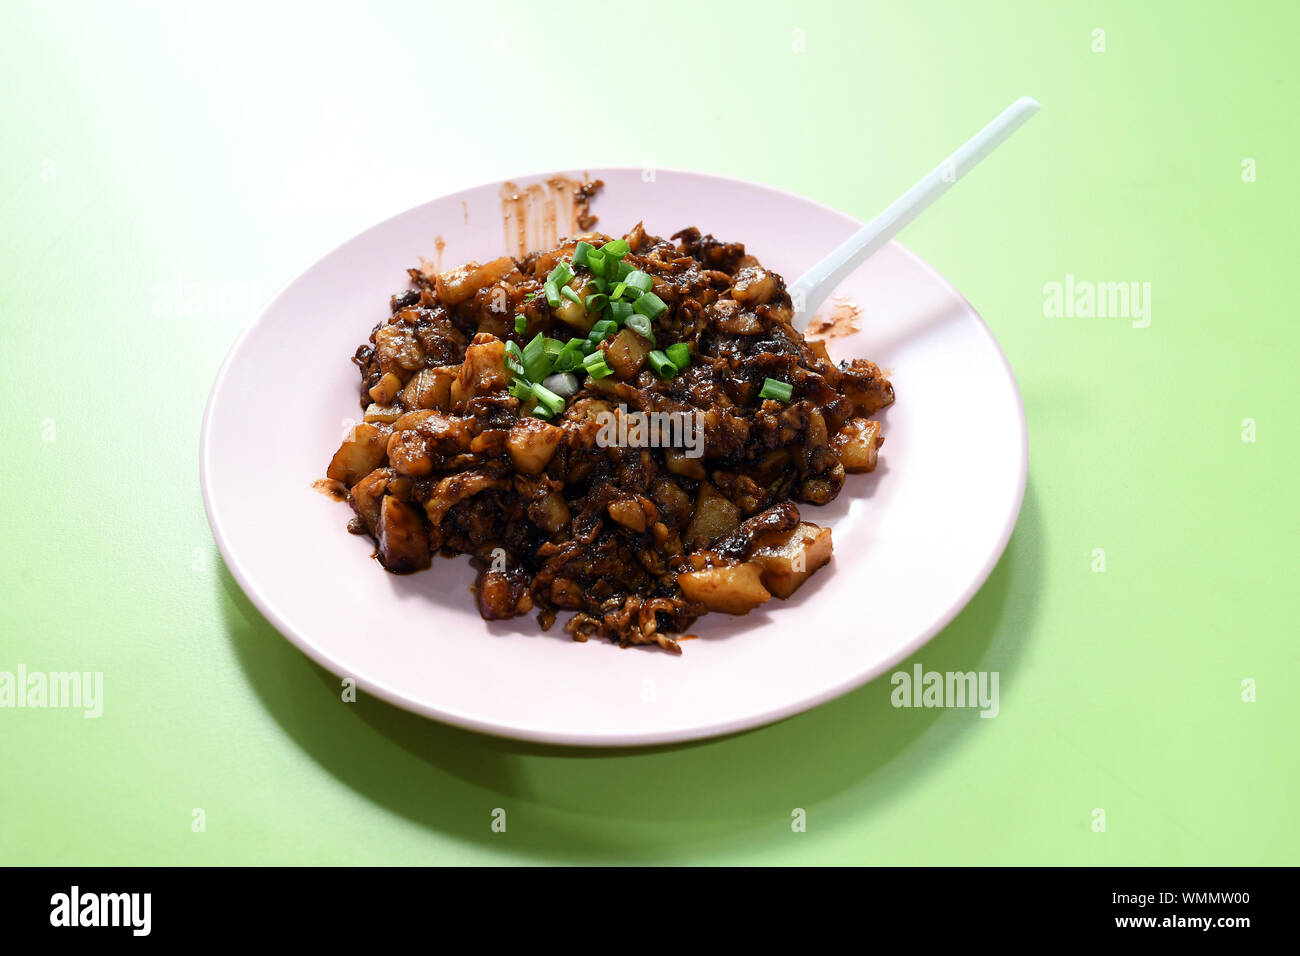 Close-up Of Asian Cuisine On A Plate Stock Photo